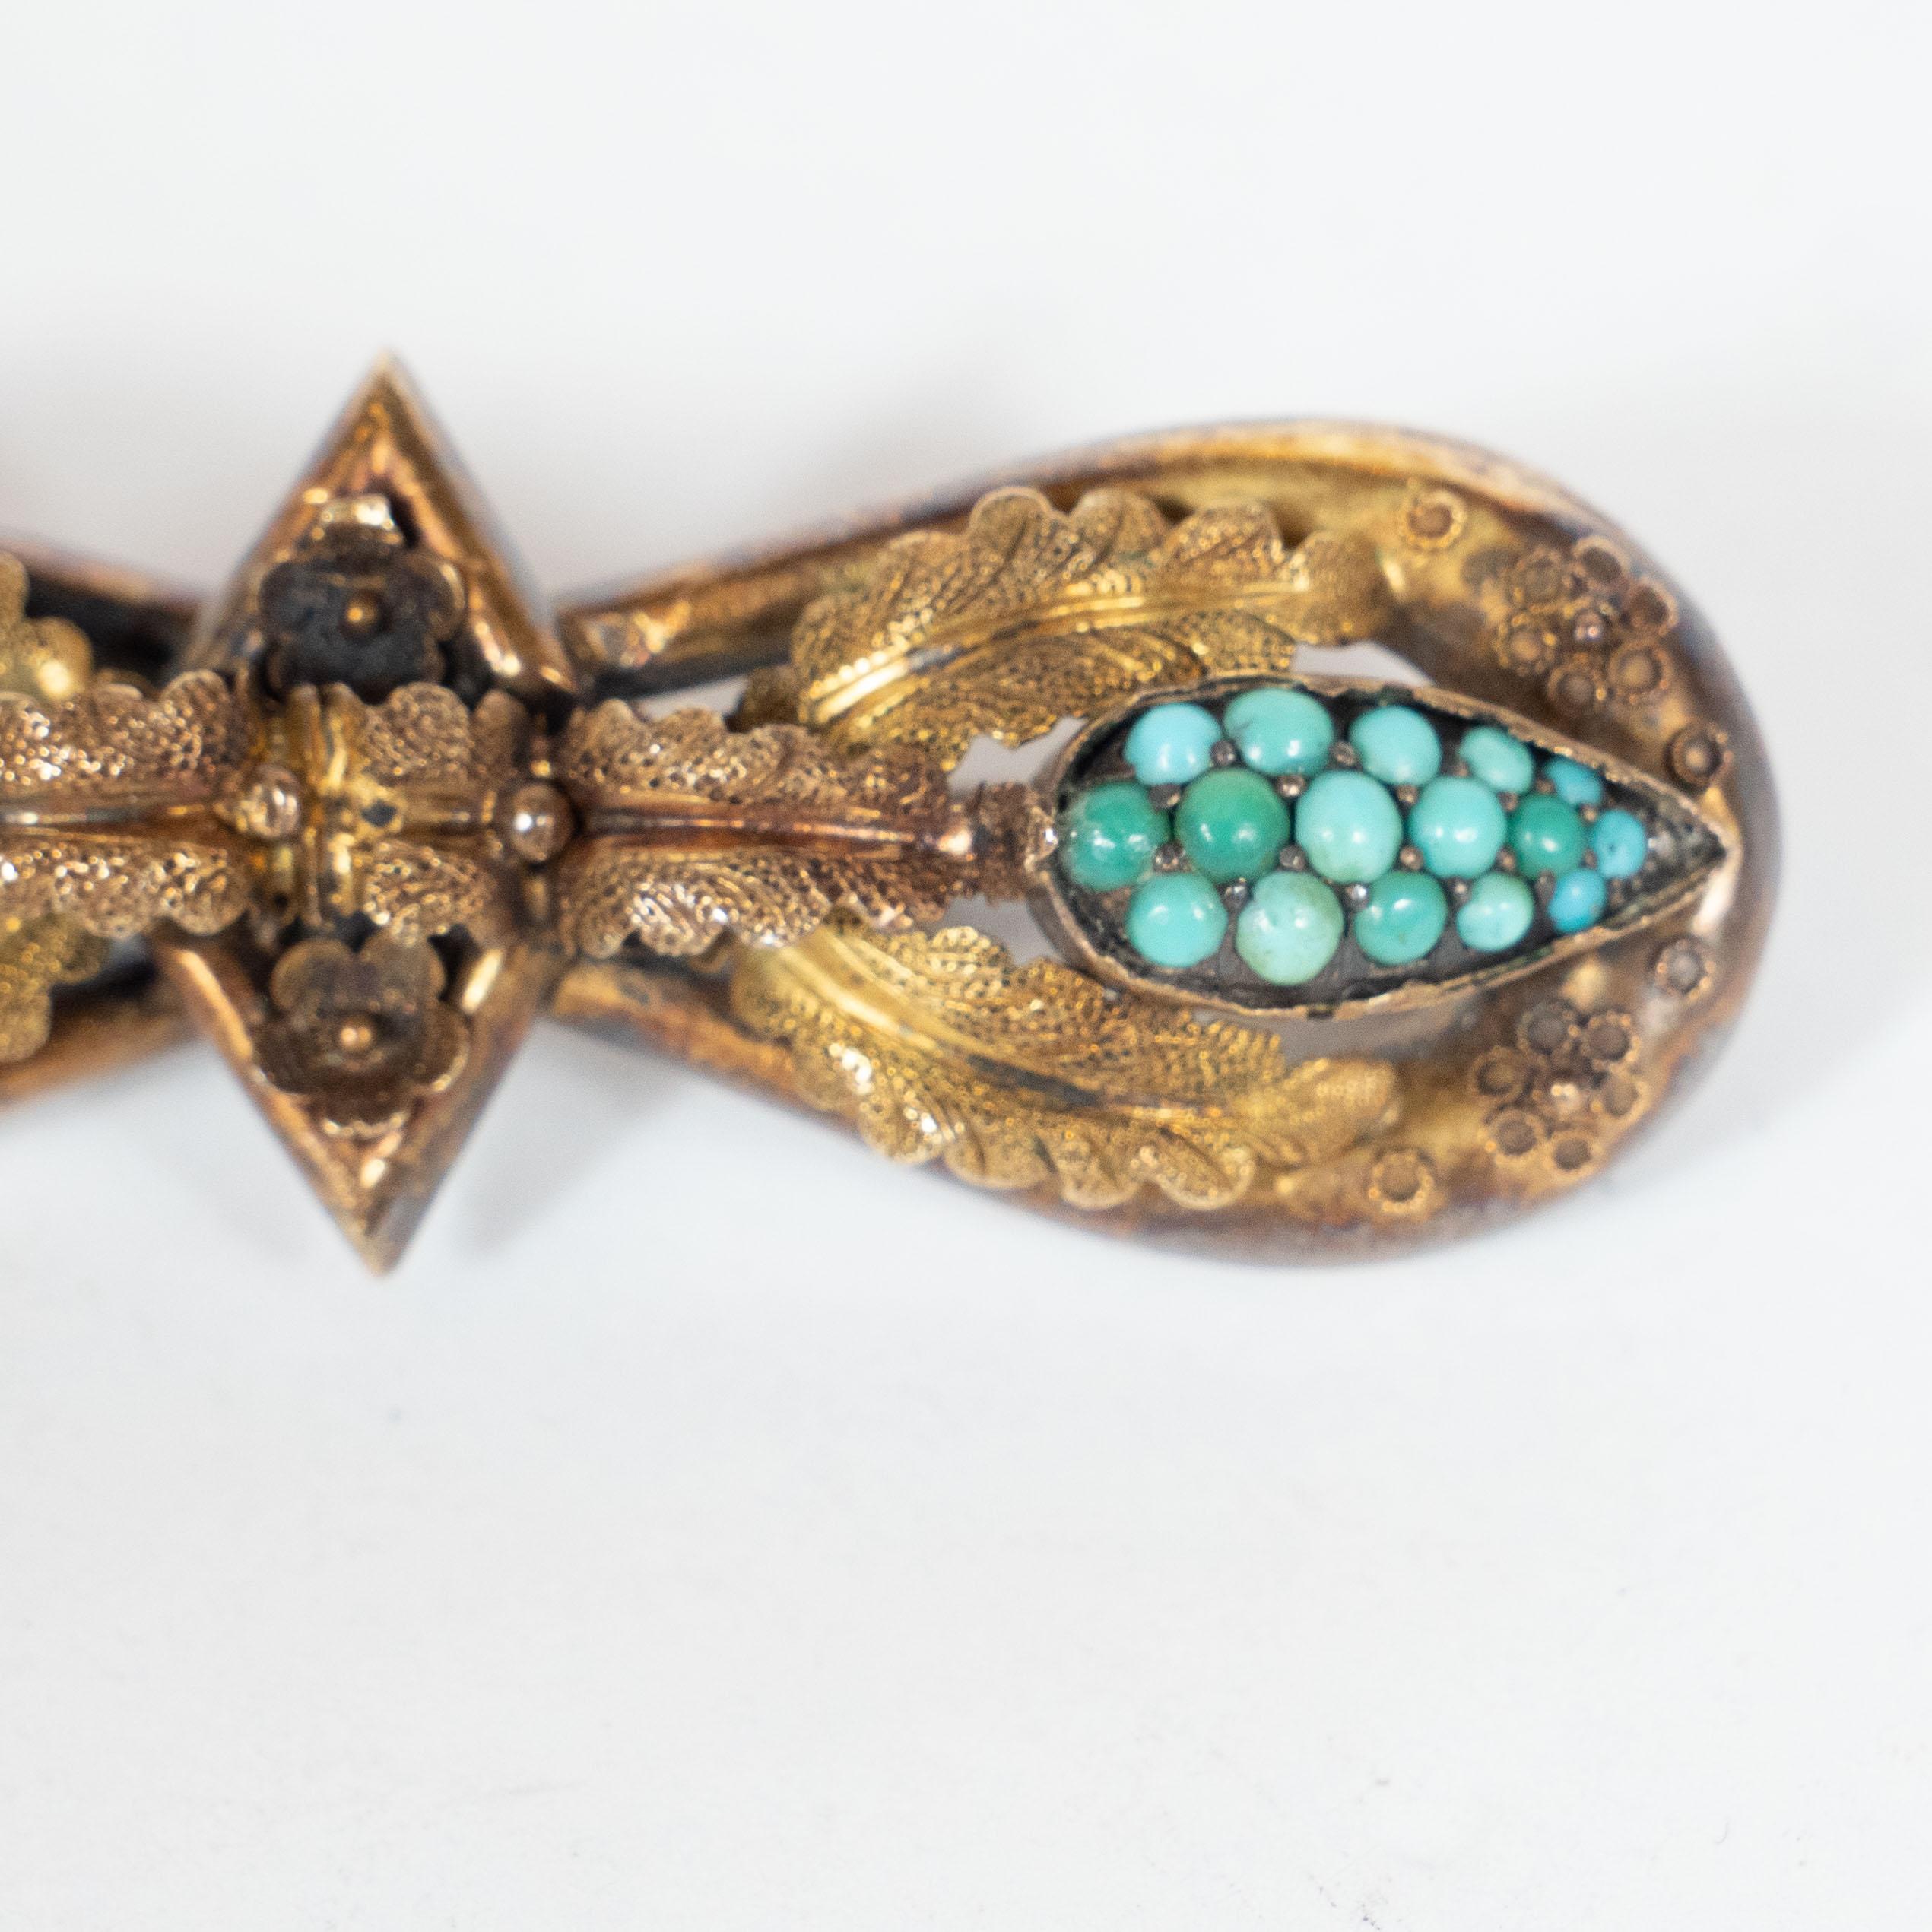 High Victorian Victorian Hourglass Form 14 Karat Gold Filigreed Brooch with Inlaid Turquoise For Sale